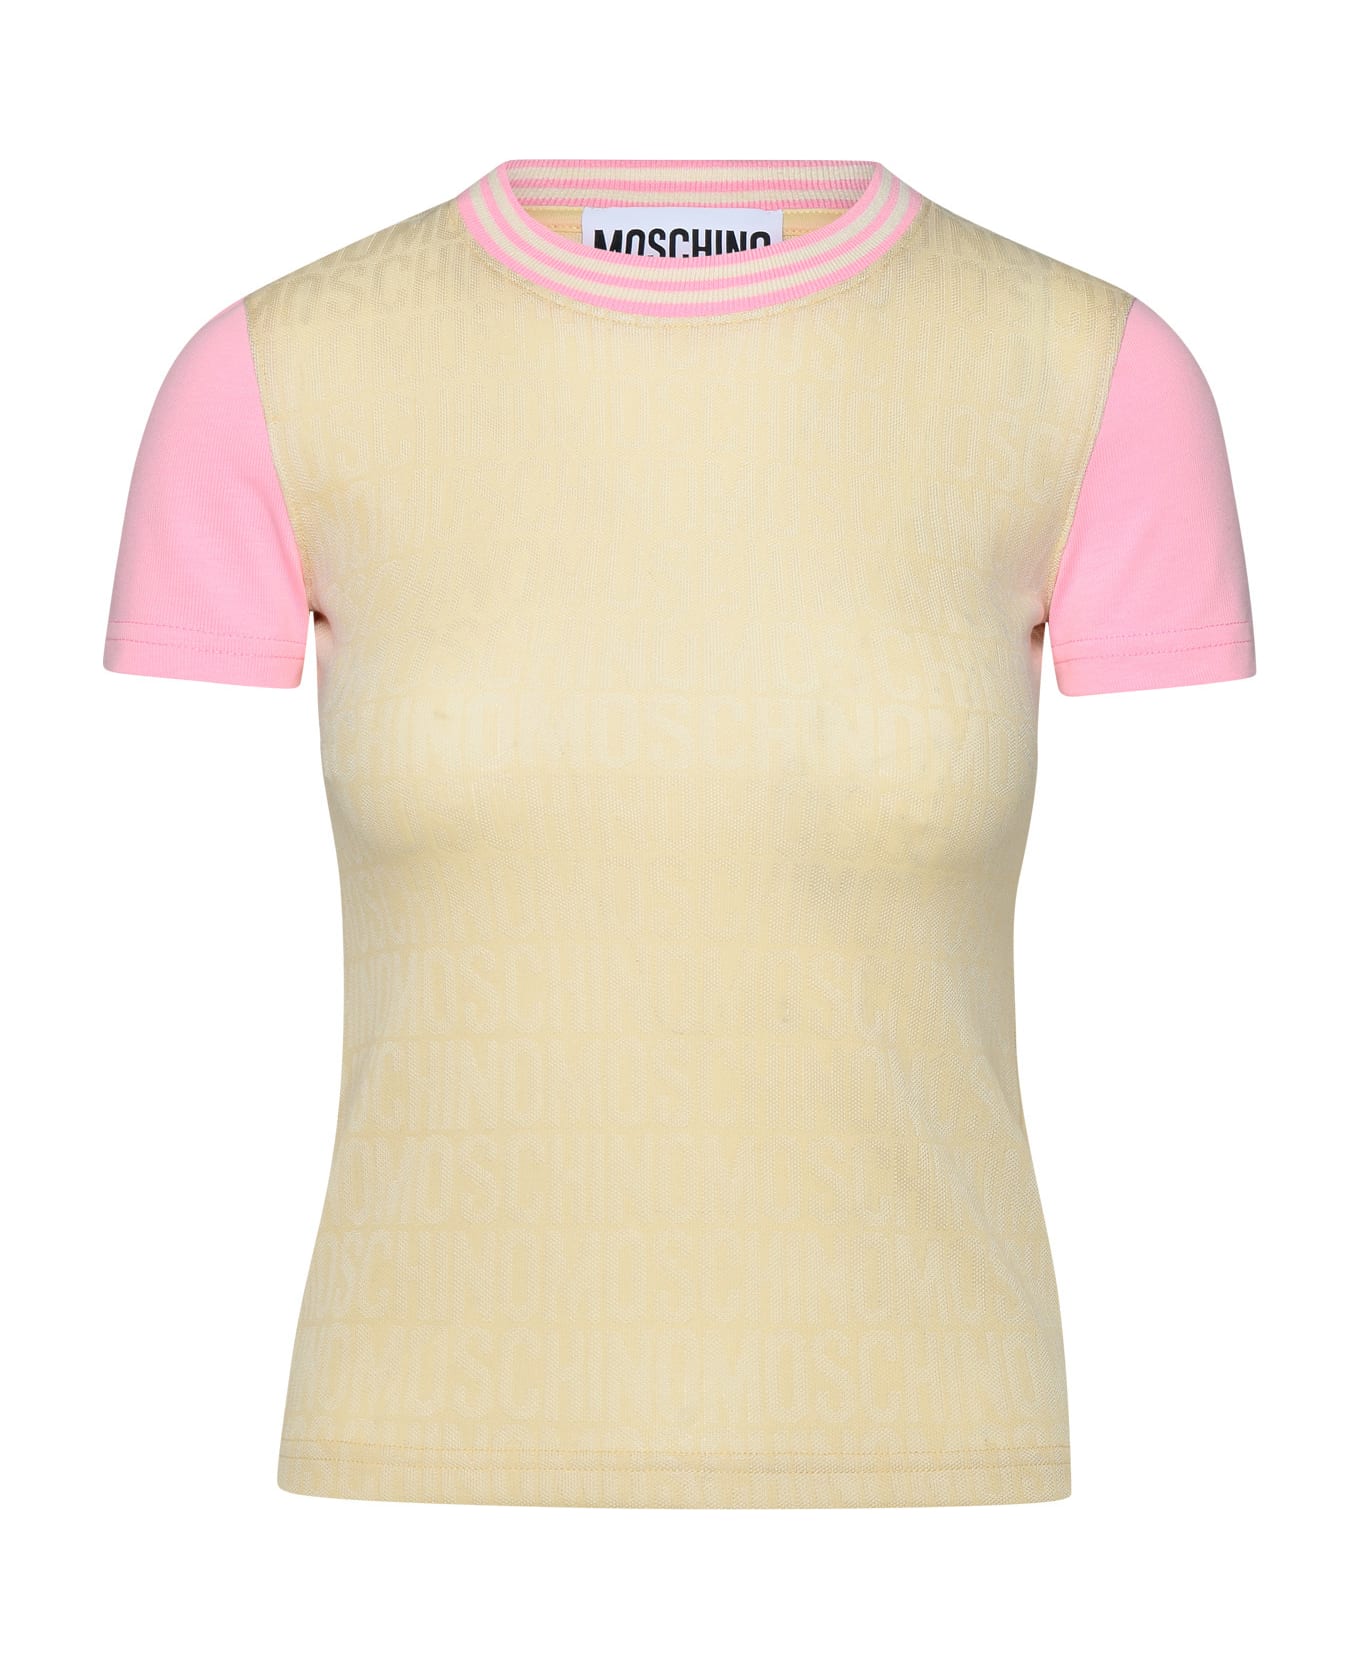 Moschino Multicolor Cotton Blend T-shirt - Ivory Tシャツ